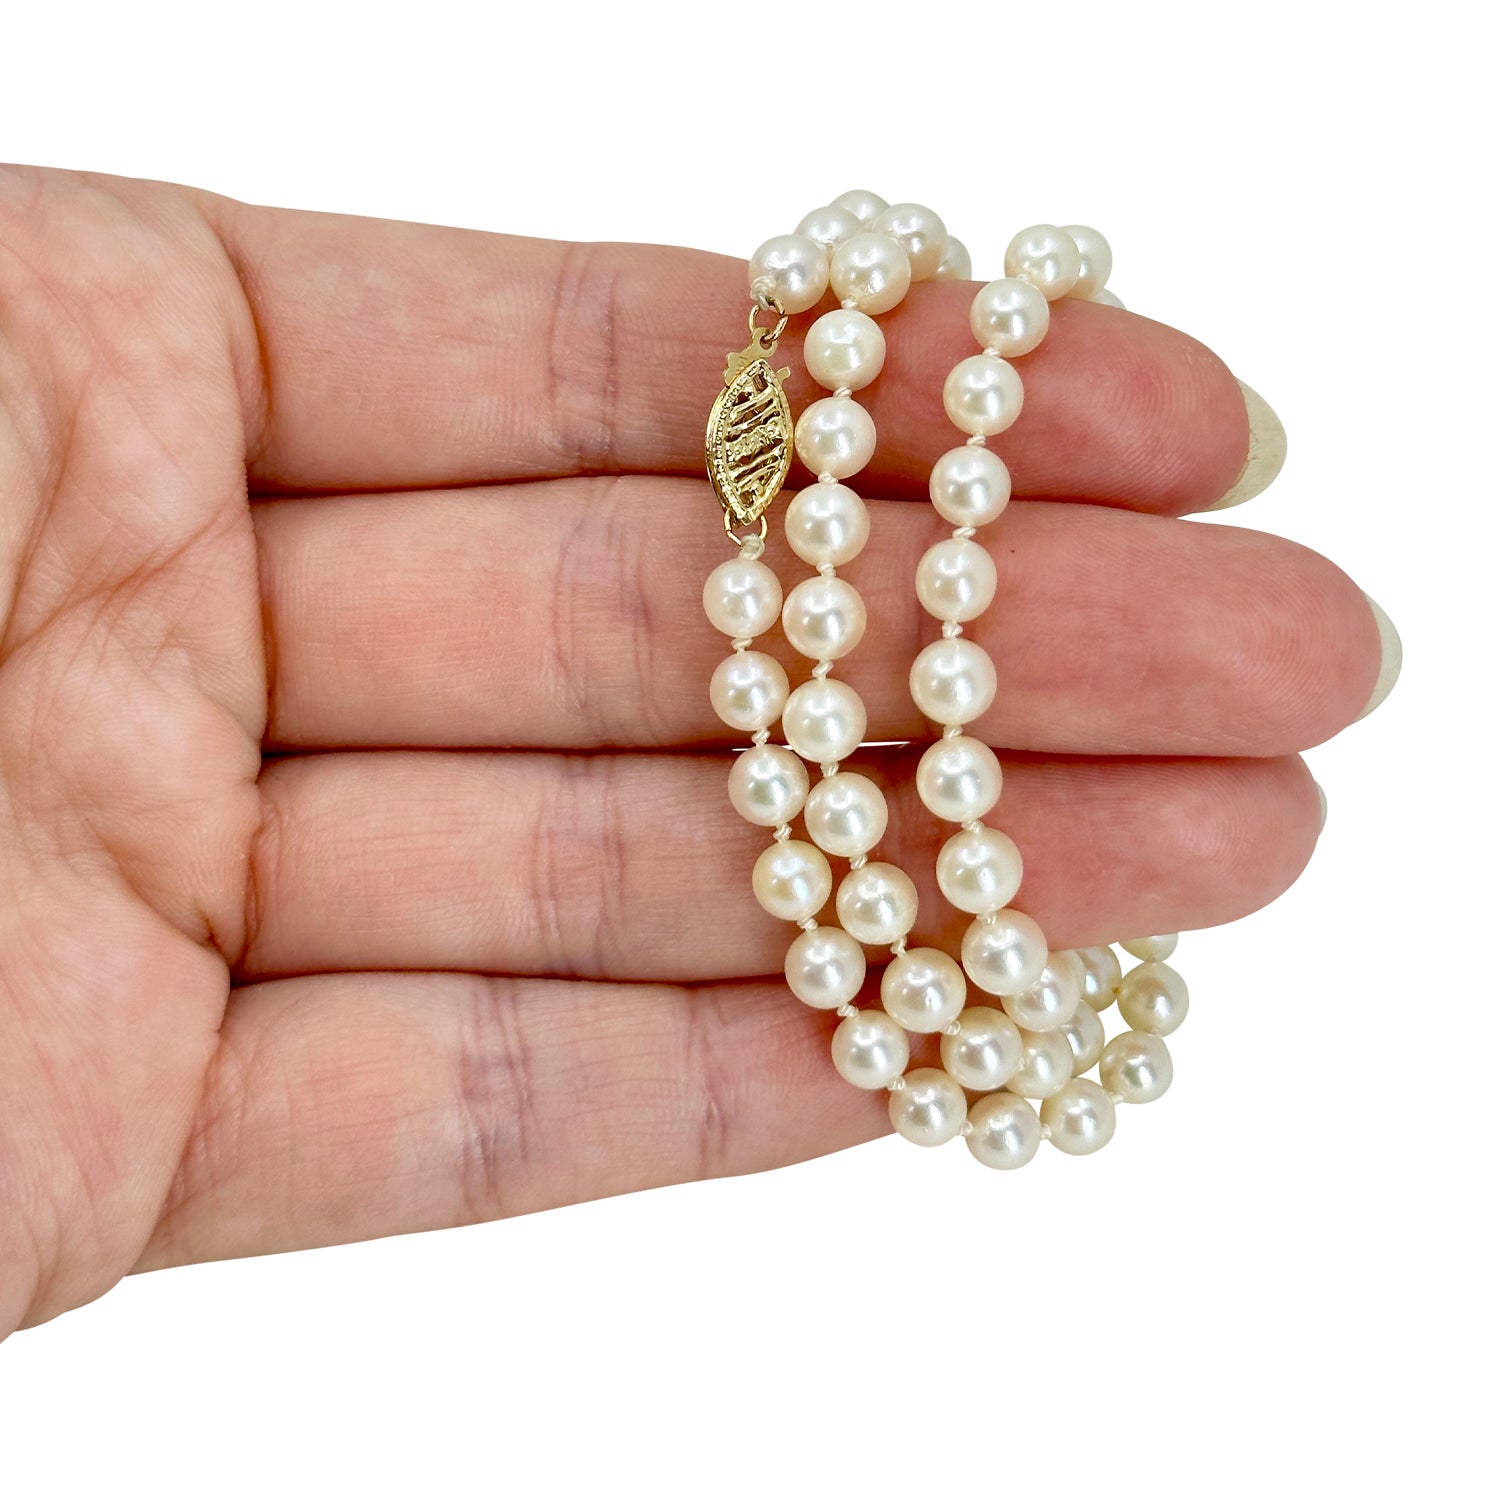 Petite Estate Mid-Century Japanese Cultured Saltwater Akoya Pearl Vintage Necklace - 14K Yellow Gold 17.25 Inch